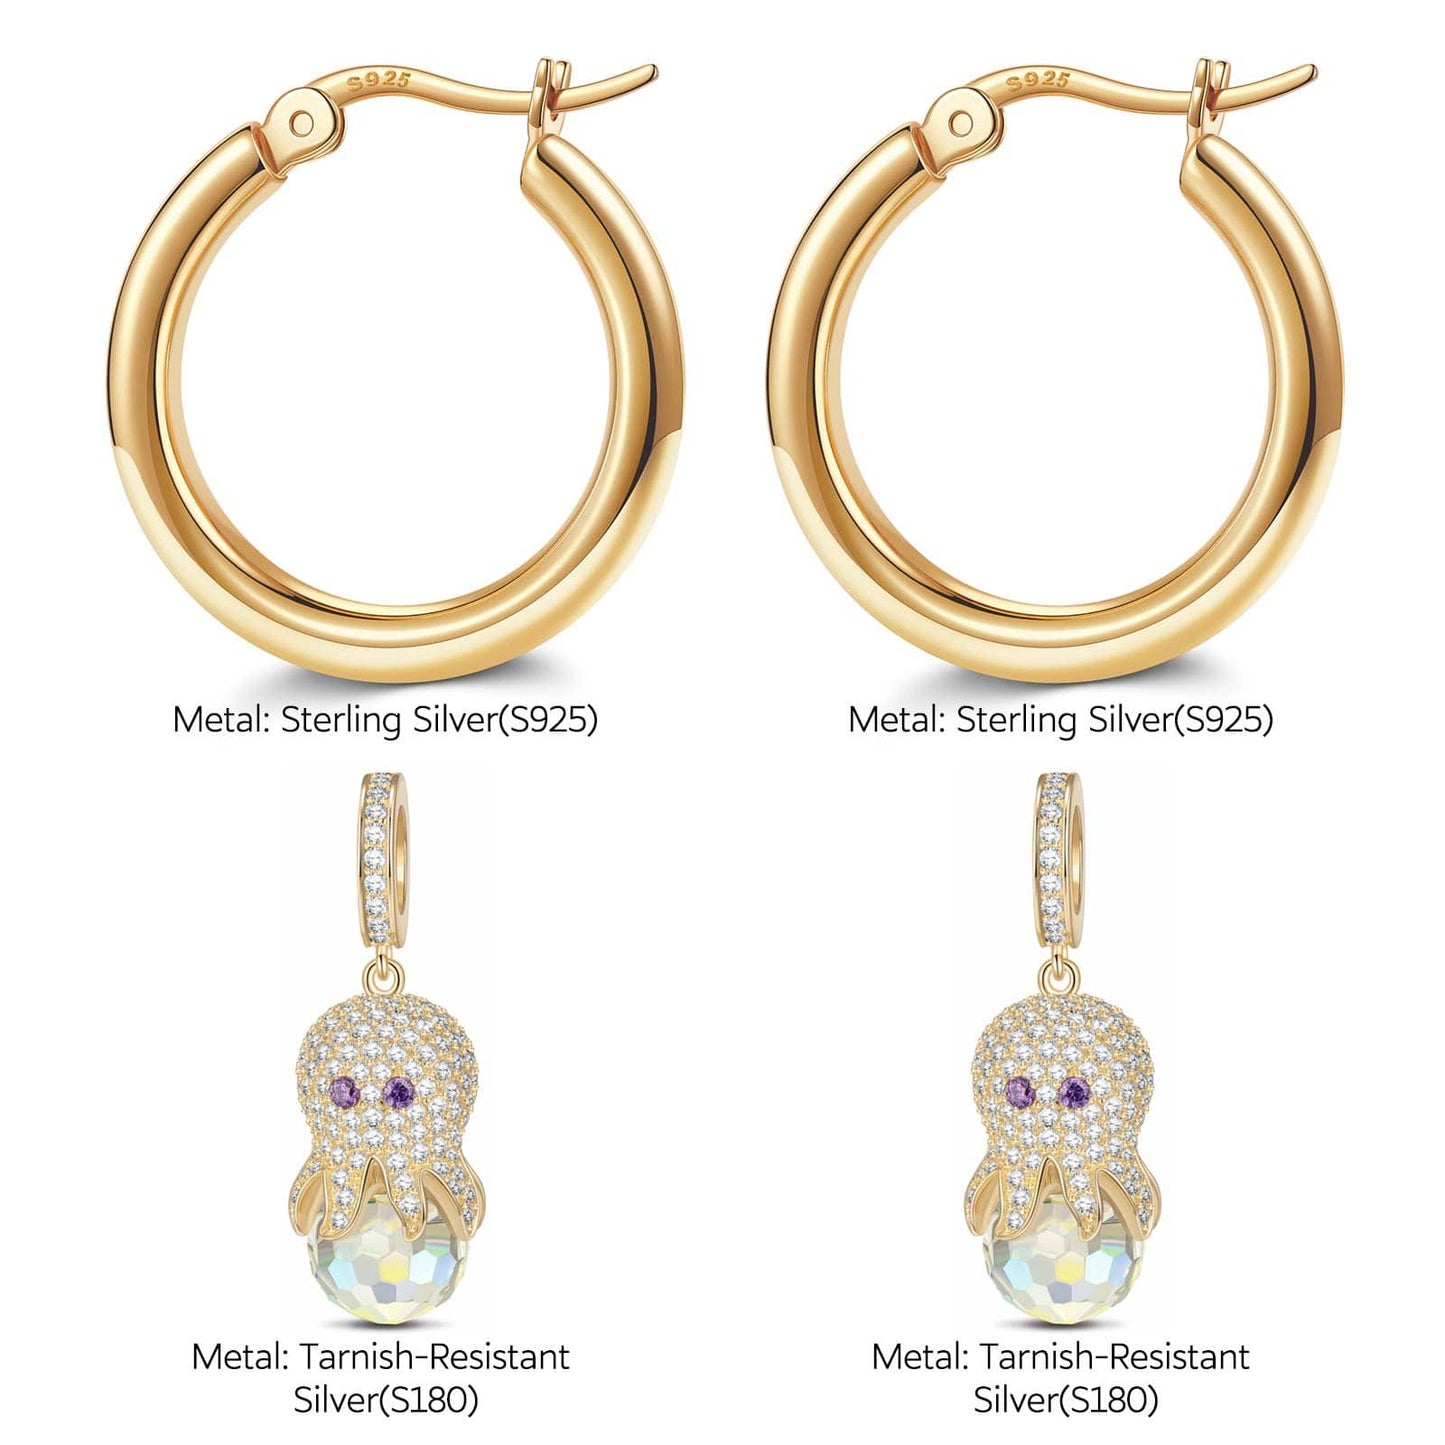 Sterling Silver Cute Octopus Charms Earrings Set In 14K Gold Plated